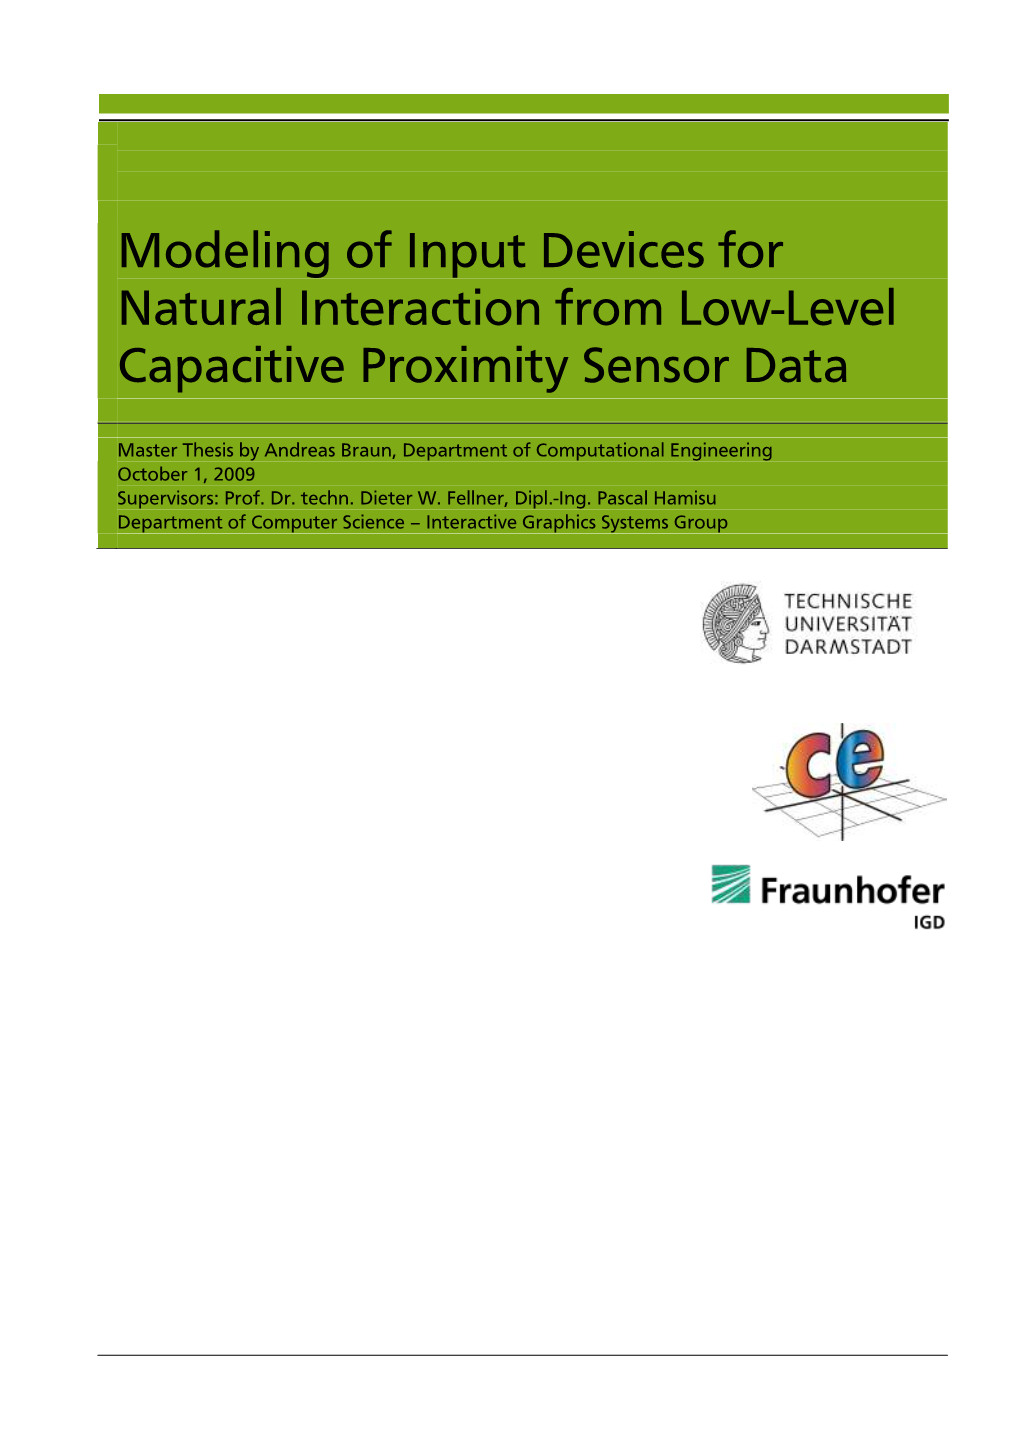 Modeling of Input Devices for Natural Interaction from Low-Level Capacitive Proximity Sensor Data